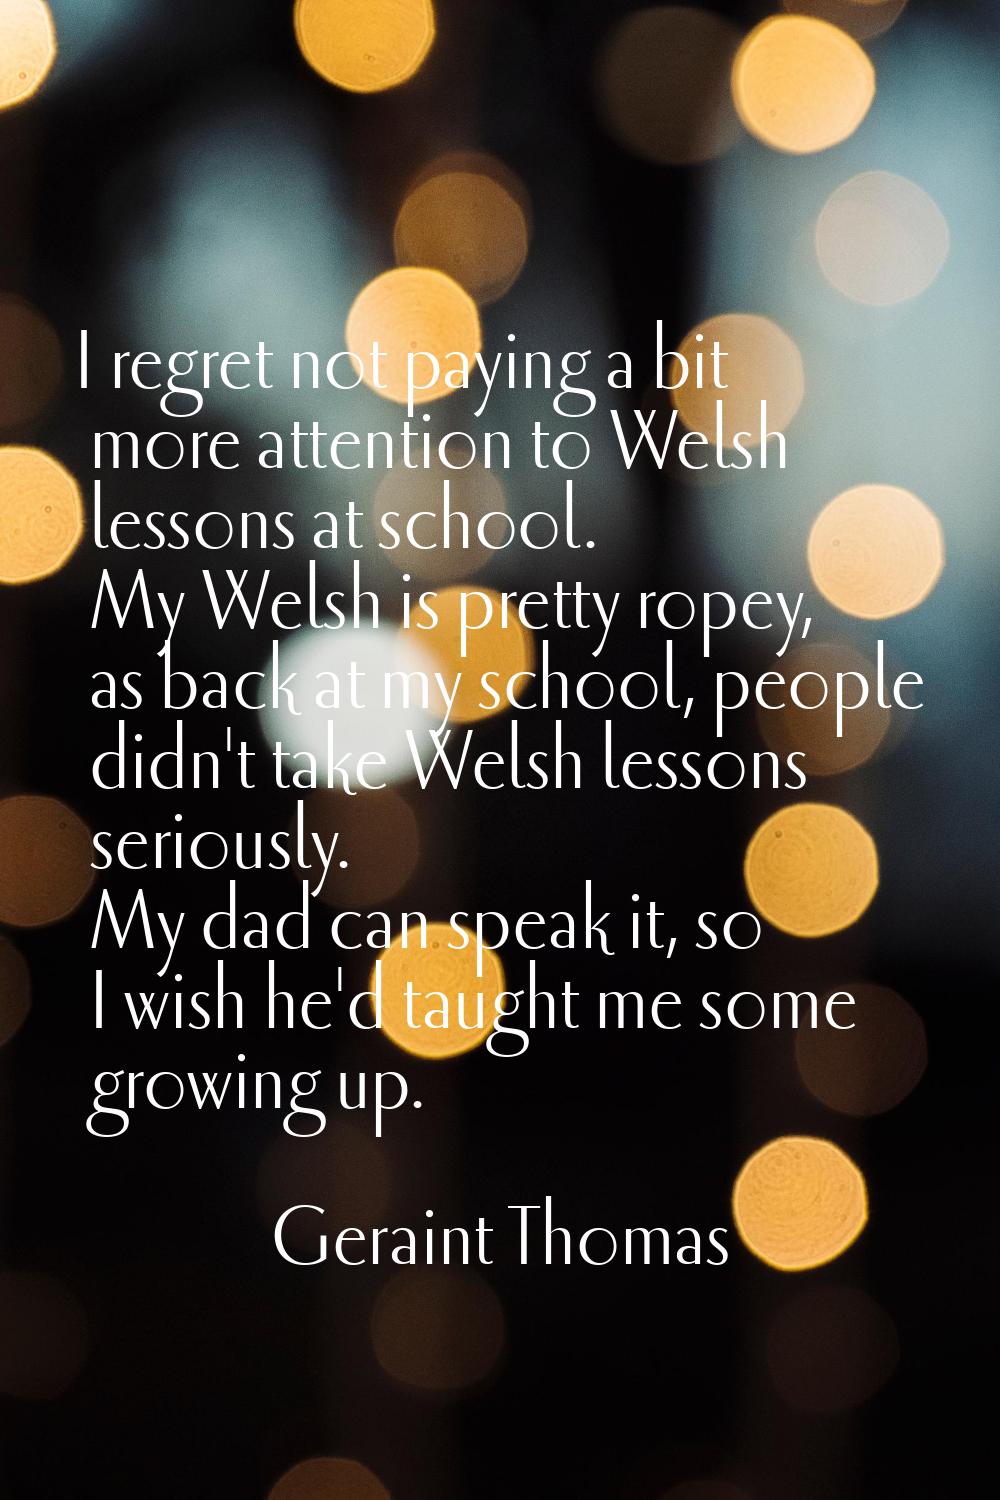 I regret not paying a bit more attention to Welsh lessons at school. My Welsh is pretty ropey, as b